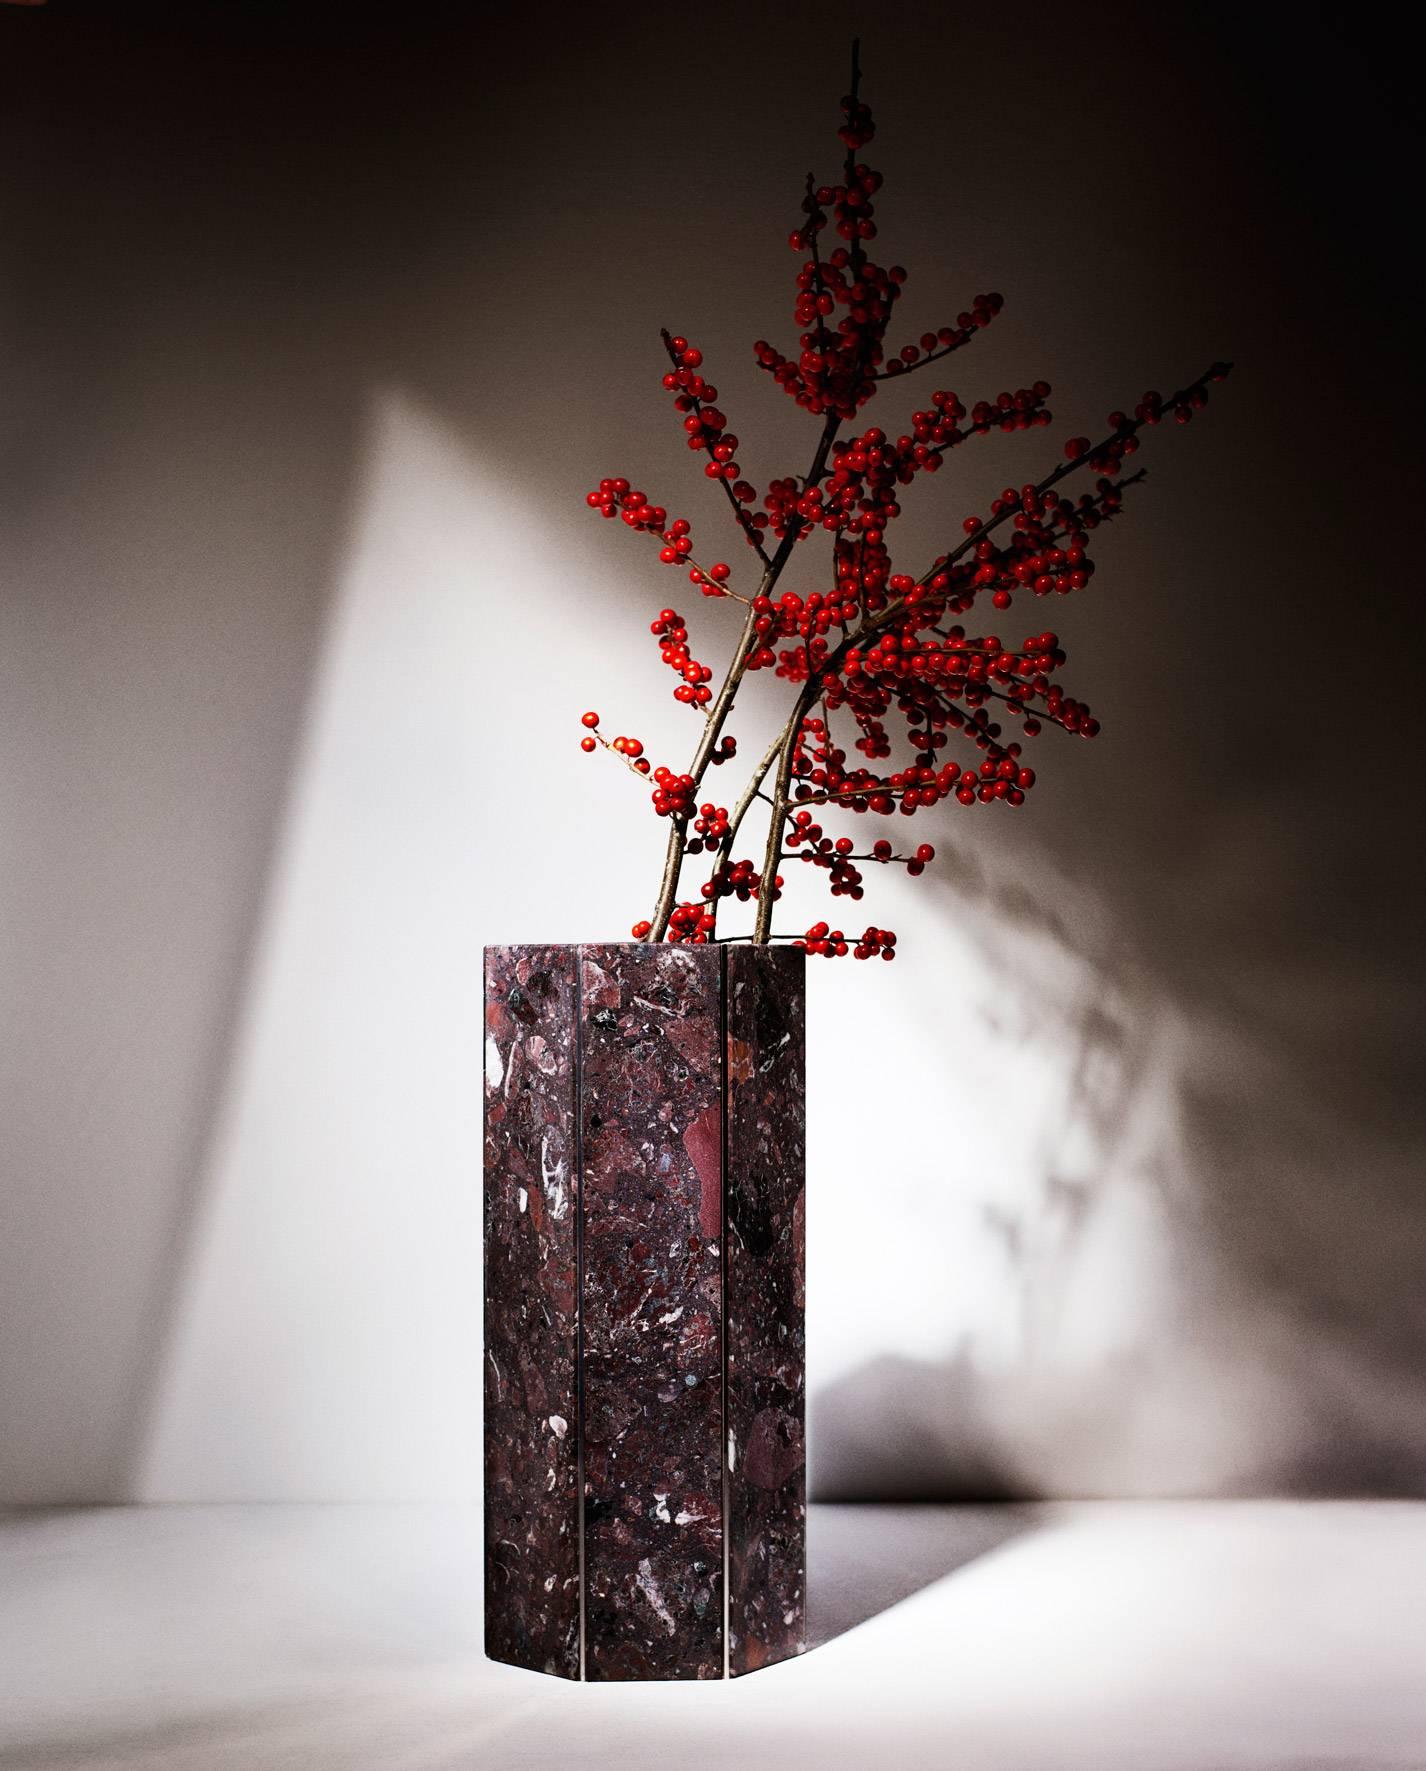 As part of the exhibition Vases & Vessels curated by Gianluca Longo at David Gill Gallery, Tino Seubert presented a new edition of Narcissus Vases made from Italian Terrazzo Rosa Perlino and Rosso Levante, polished stainless steel and smoked Parsol